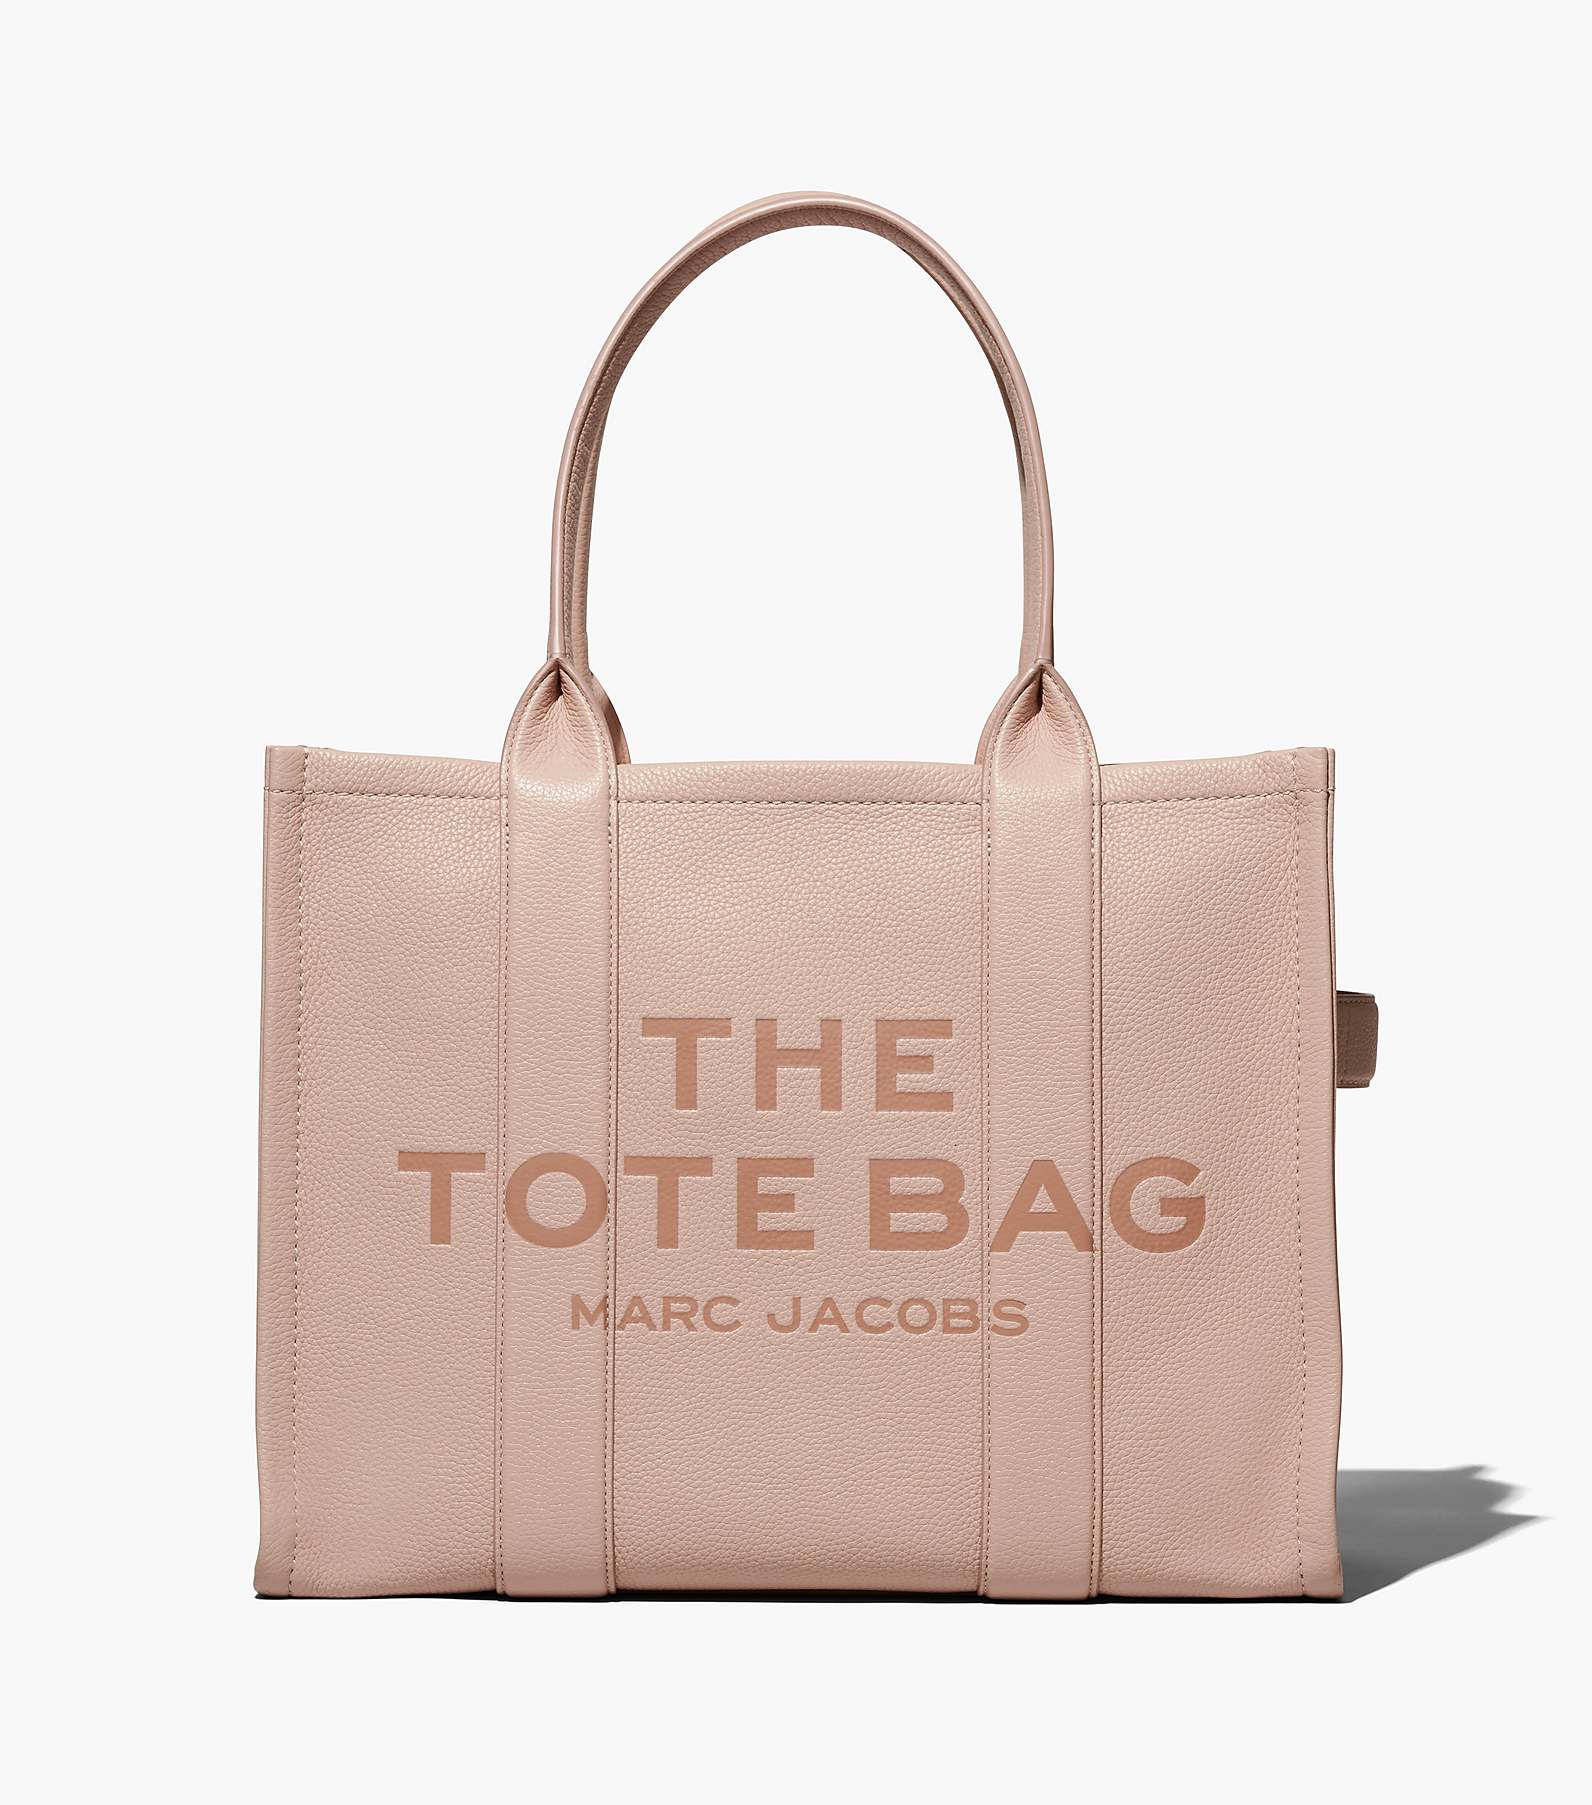 The Leather Large Tote Bag(The Tote Bag)